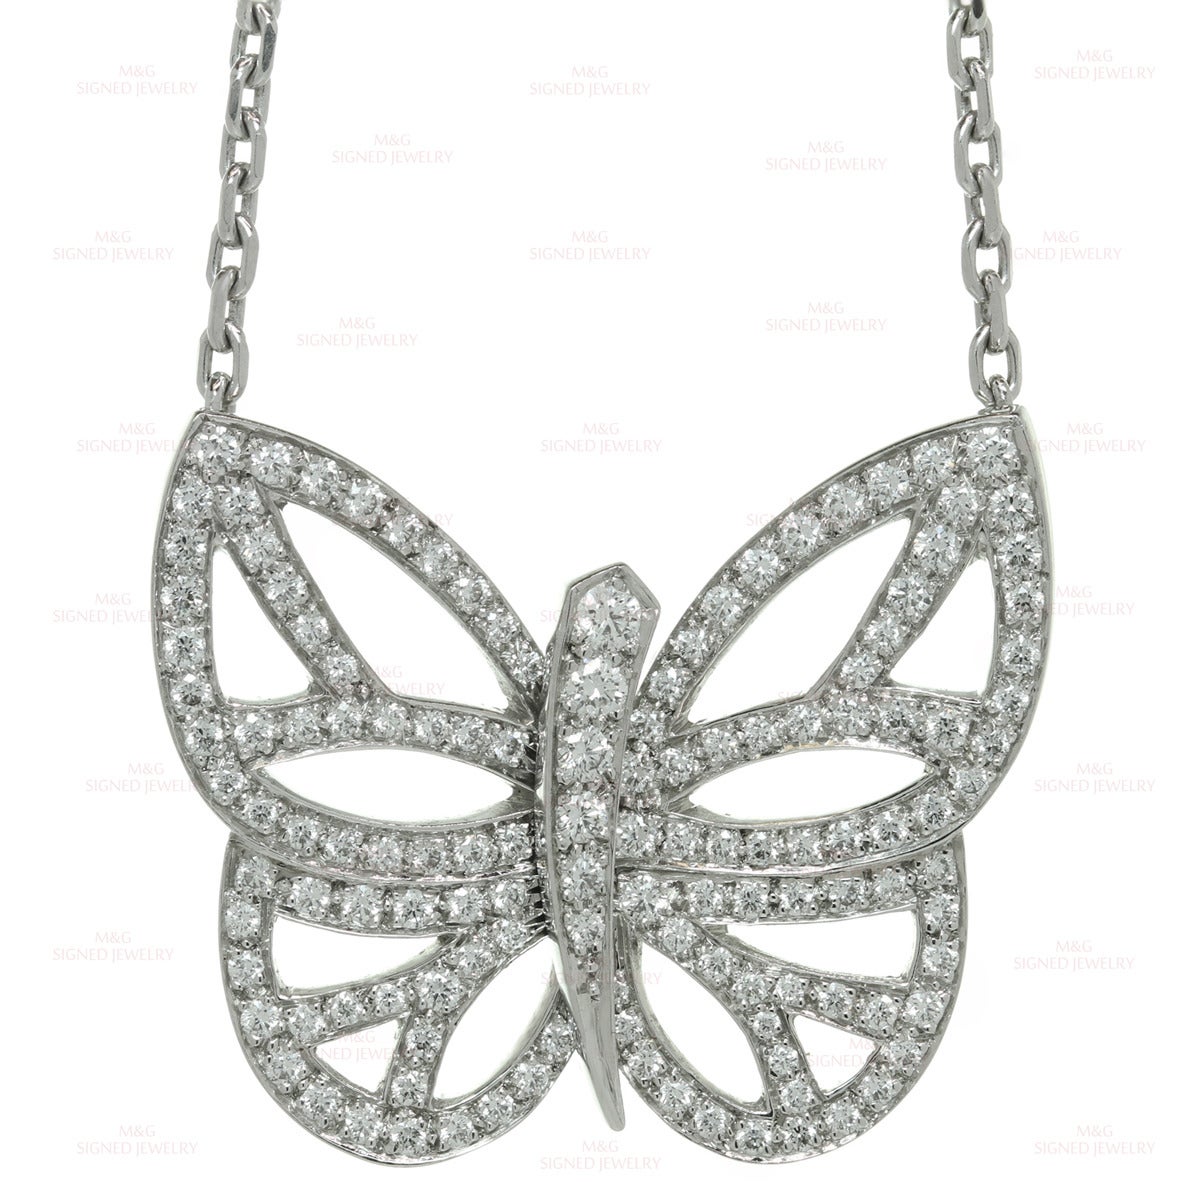 This stunning necklace from the iconic Flying Beauties collection is made in 18k white gold and features a sparkling butterfly-shaped pendant set with brilliant-cut round D-F VVS1-VVS2 diamonds of an estimated 1.50 carats. Made in France.